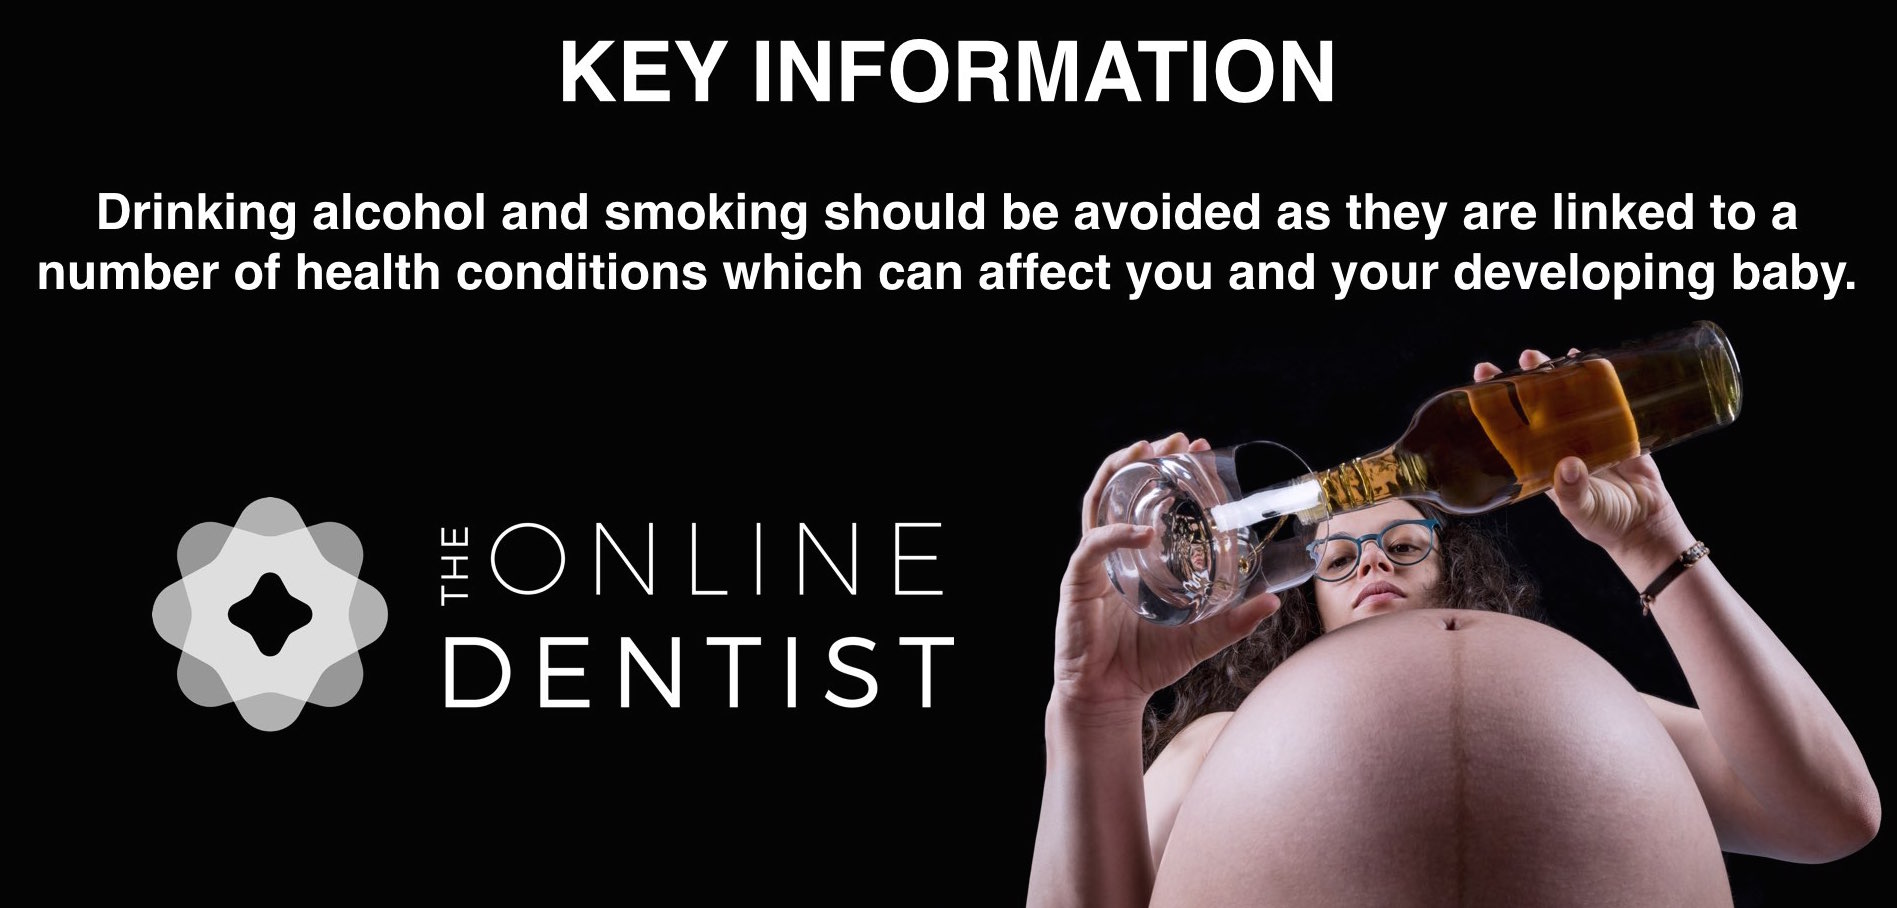 Drinking alcohol can harm your unborn child during pregnancy.